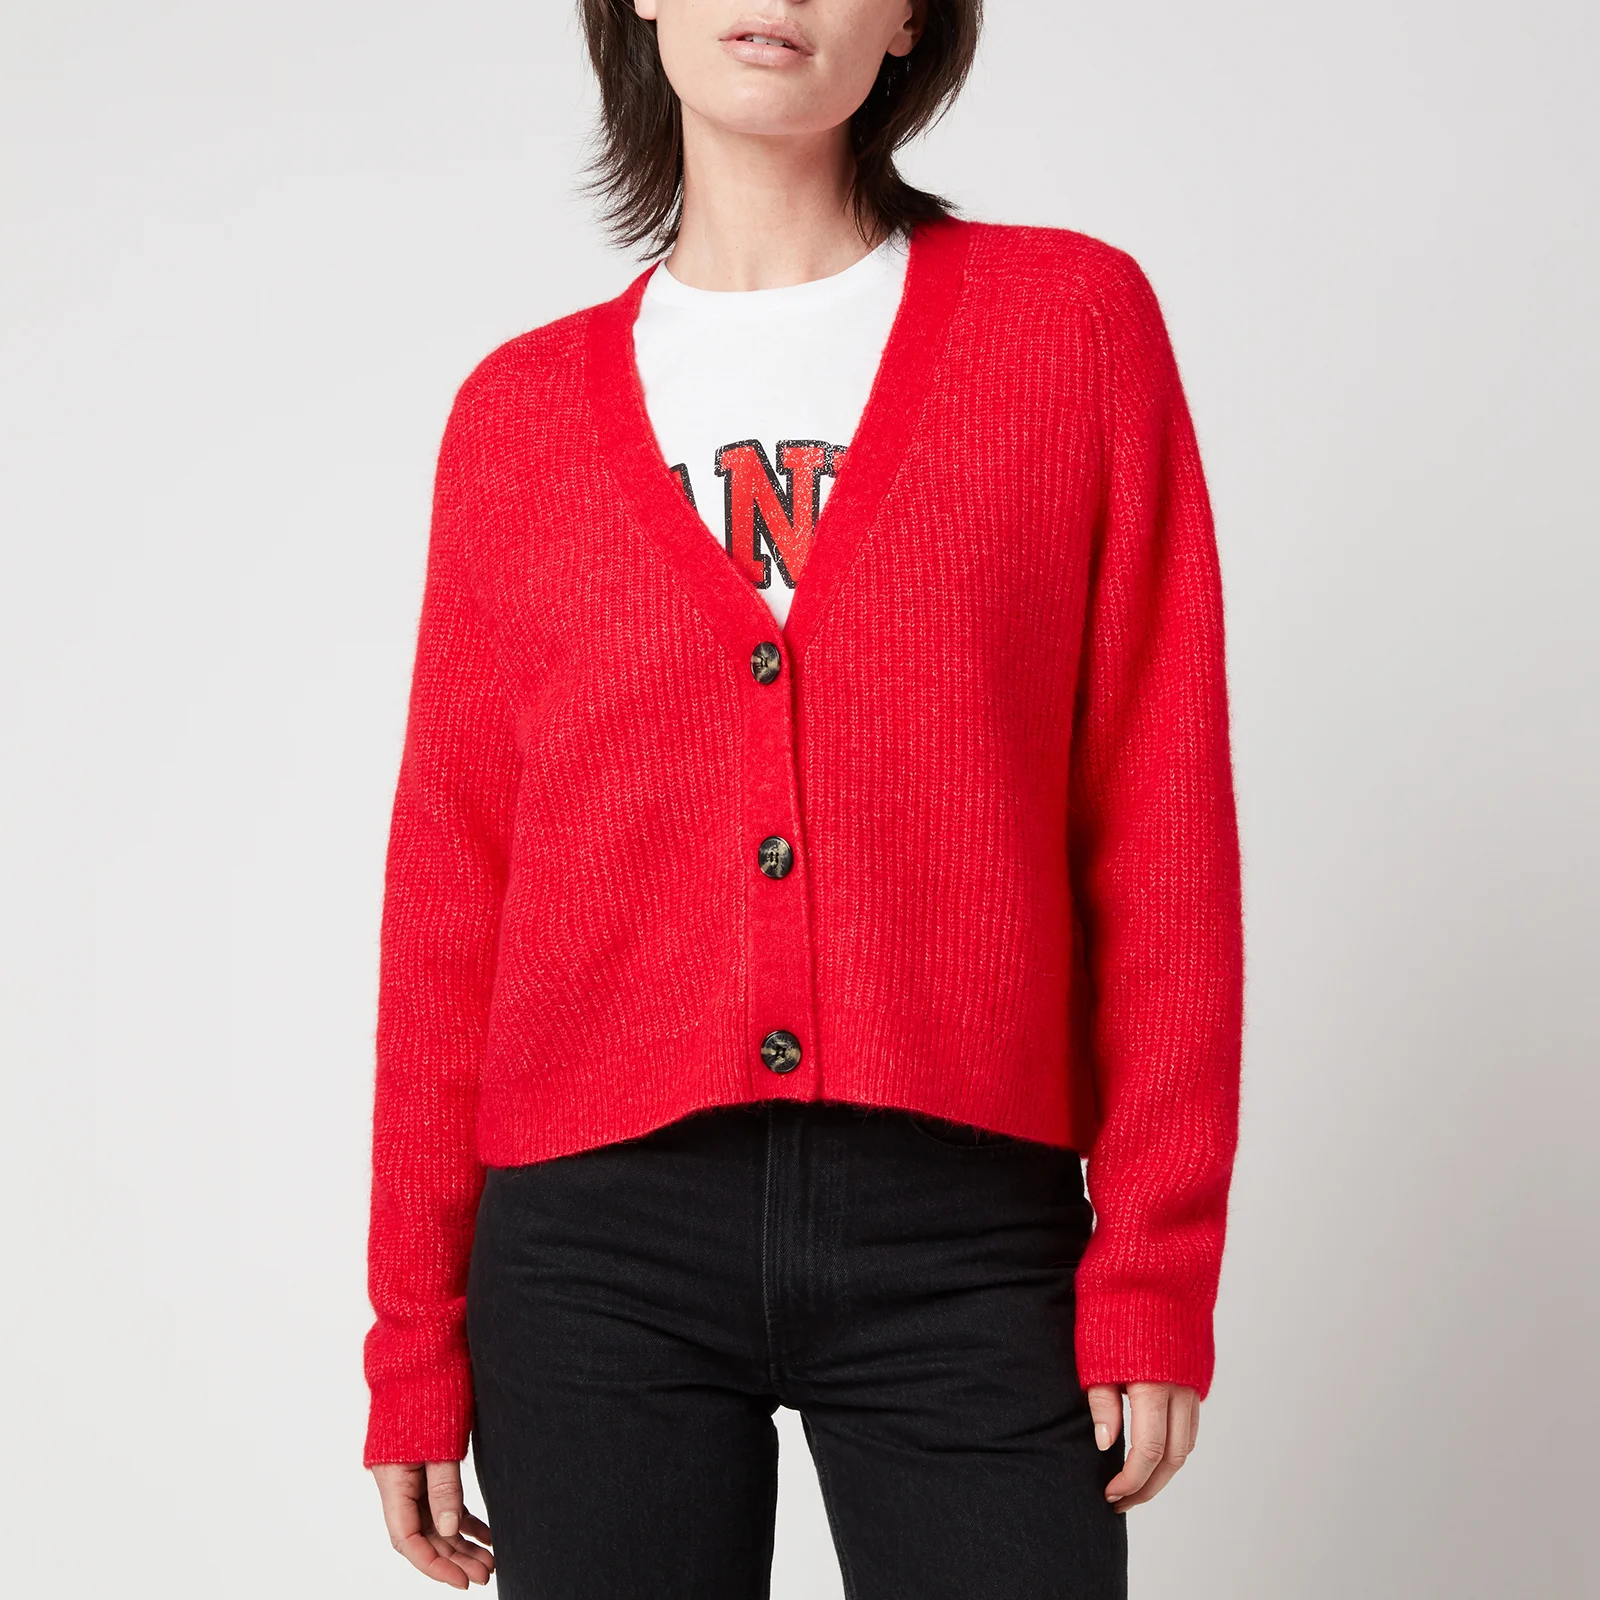 Ganni Women's Soft Wool Knitted Cardigan - Flame Scarlet Image 1